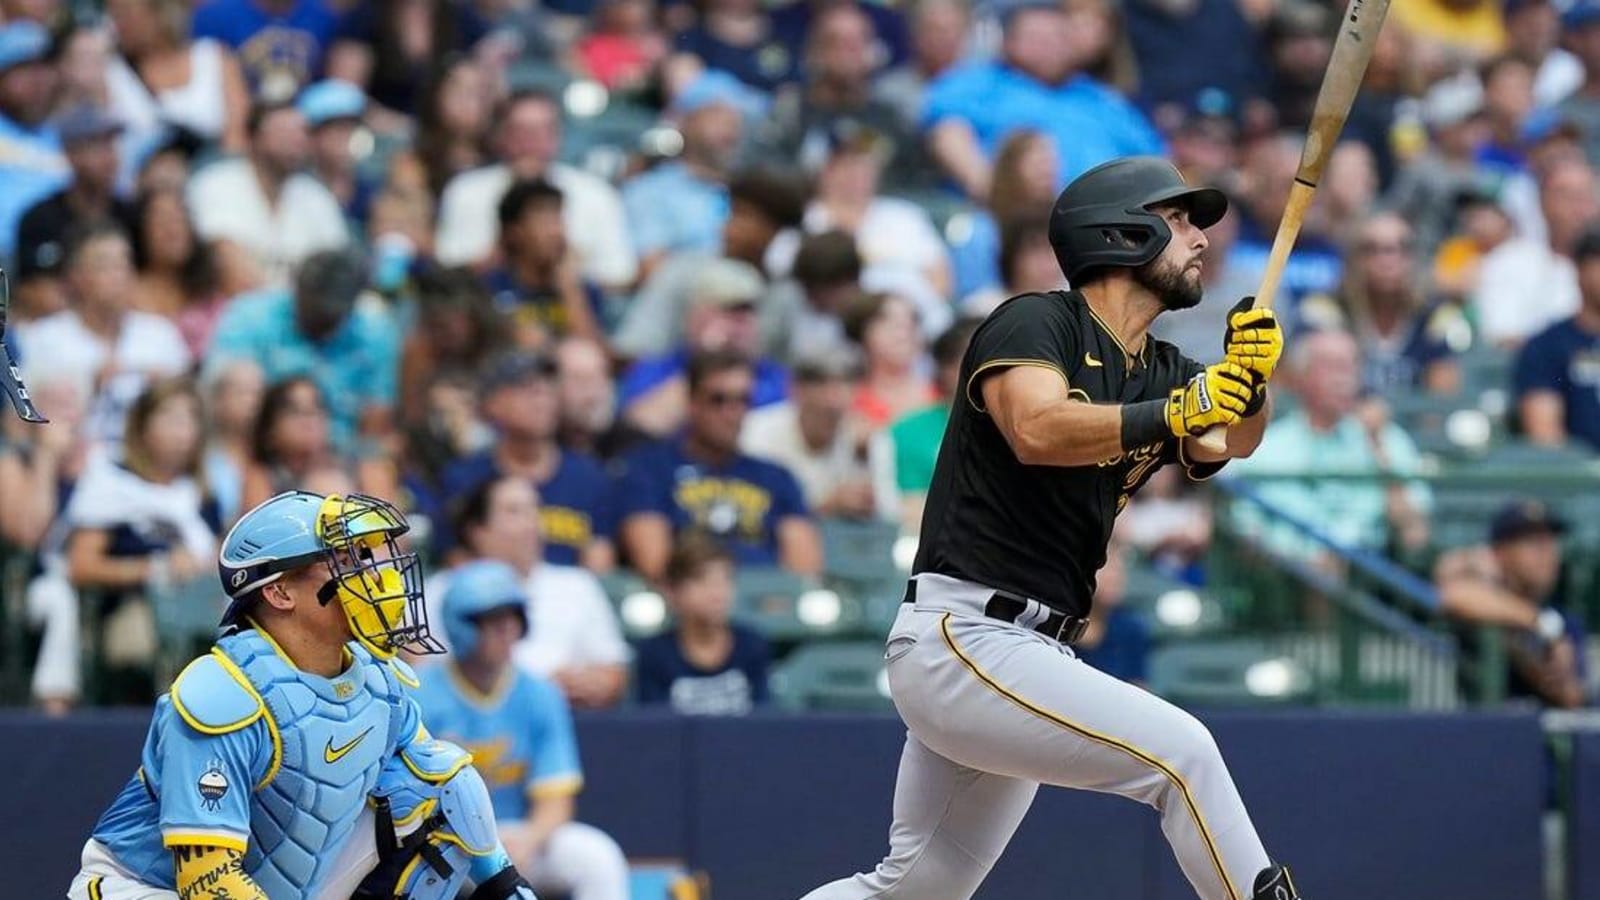 Pirates sock four home runs, double up Brewers